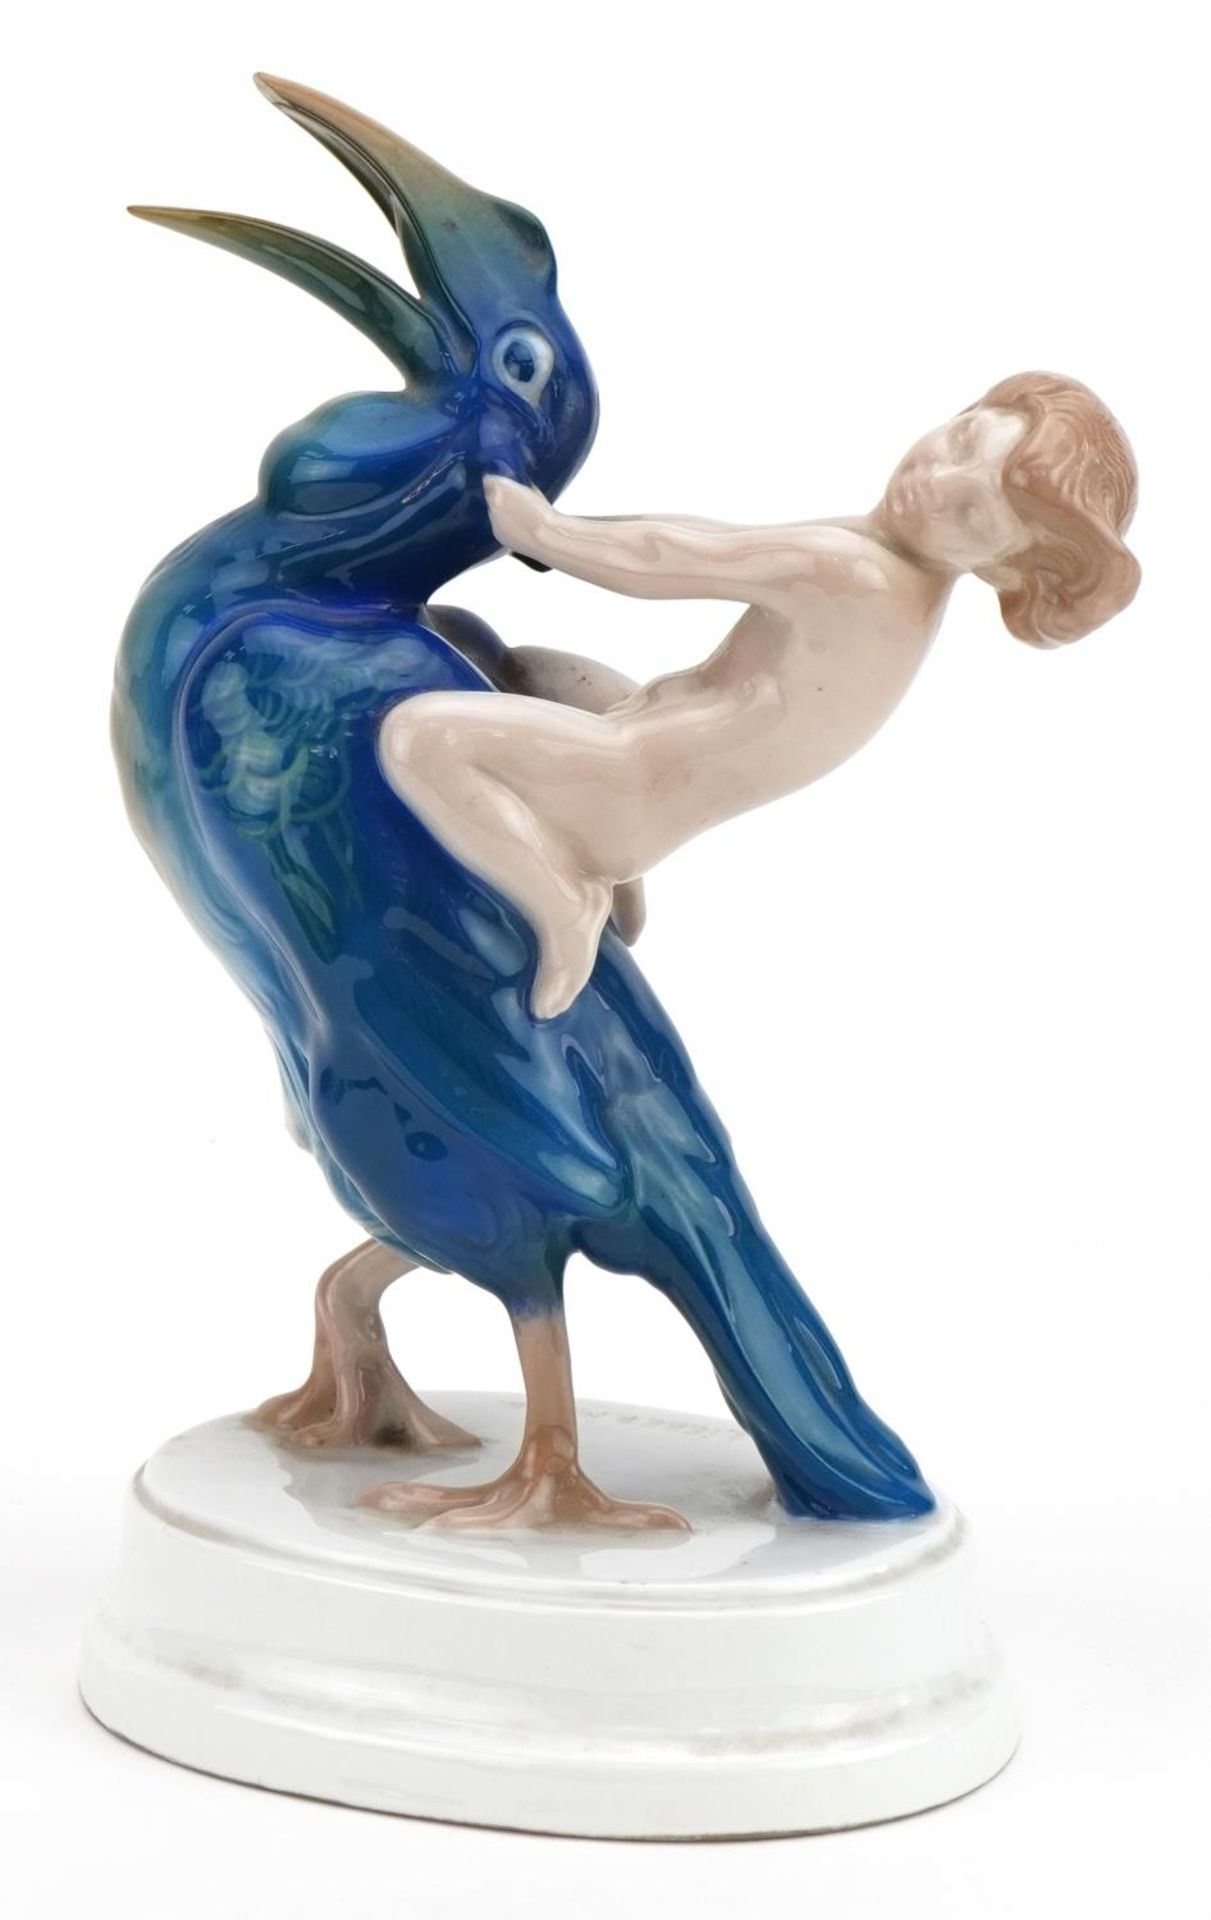 Ferdinand Liebermann for Rosenthal, German porcelain figure group of a nude boy seated on a bird, - Image 2 of 8